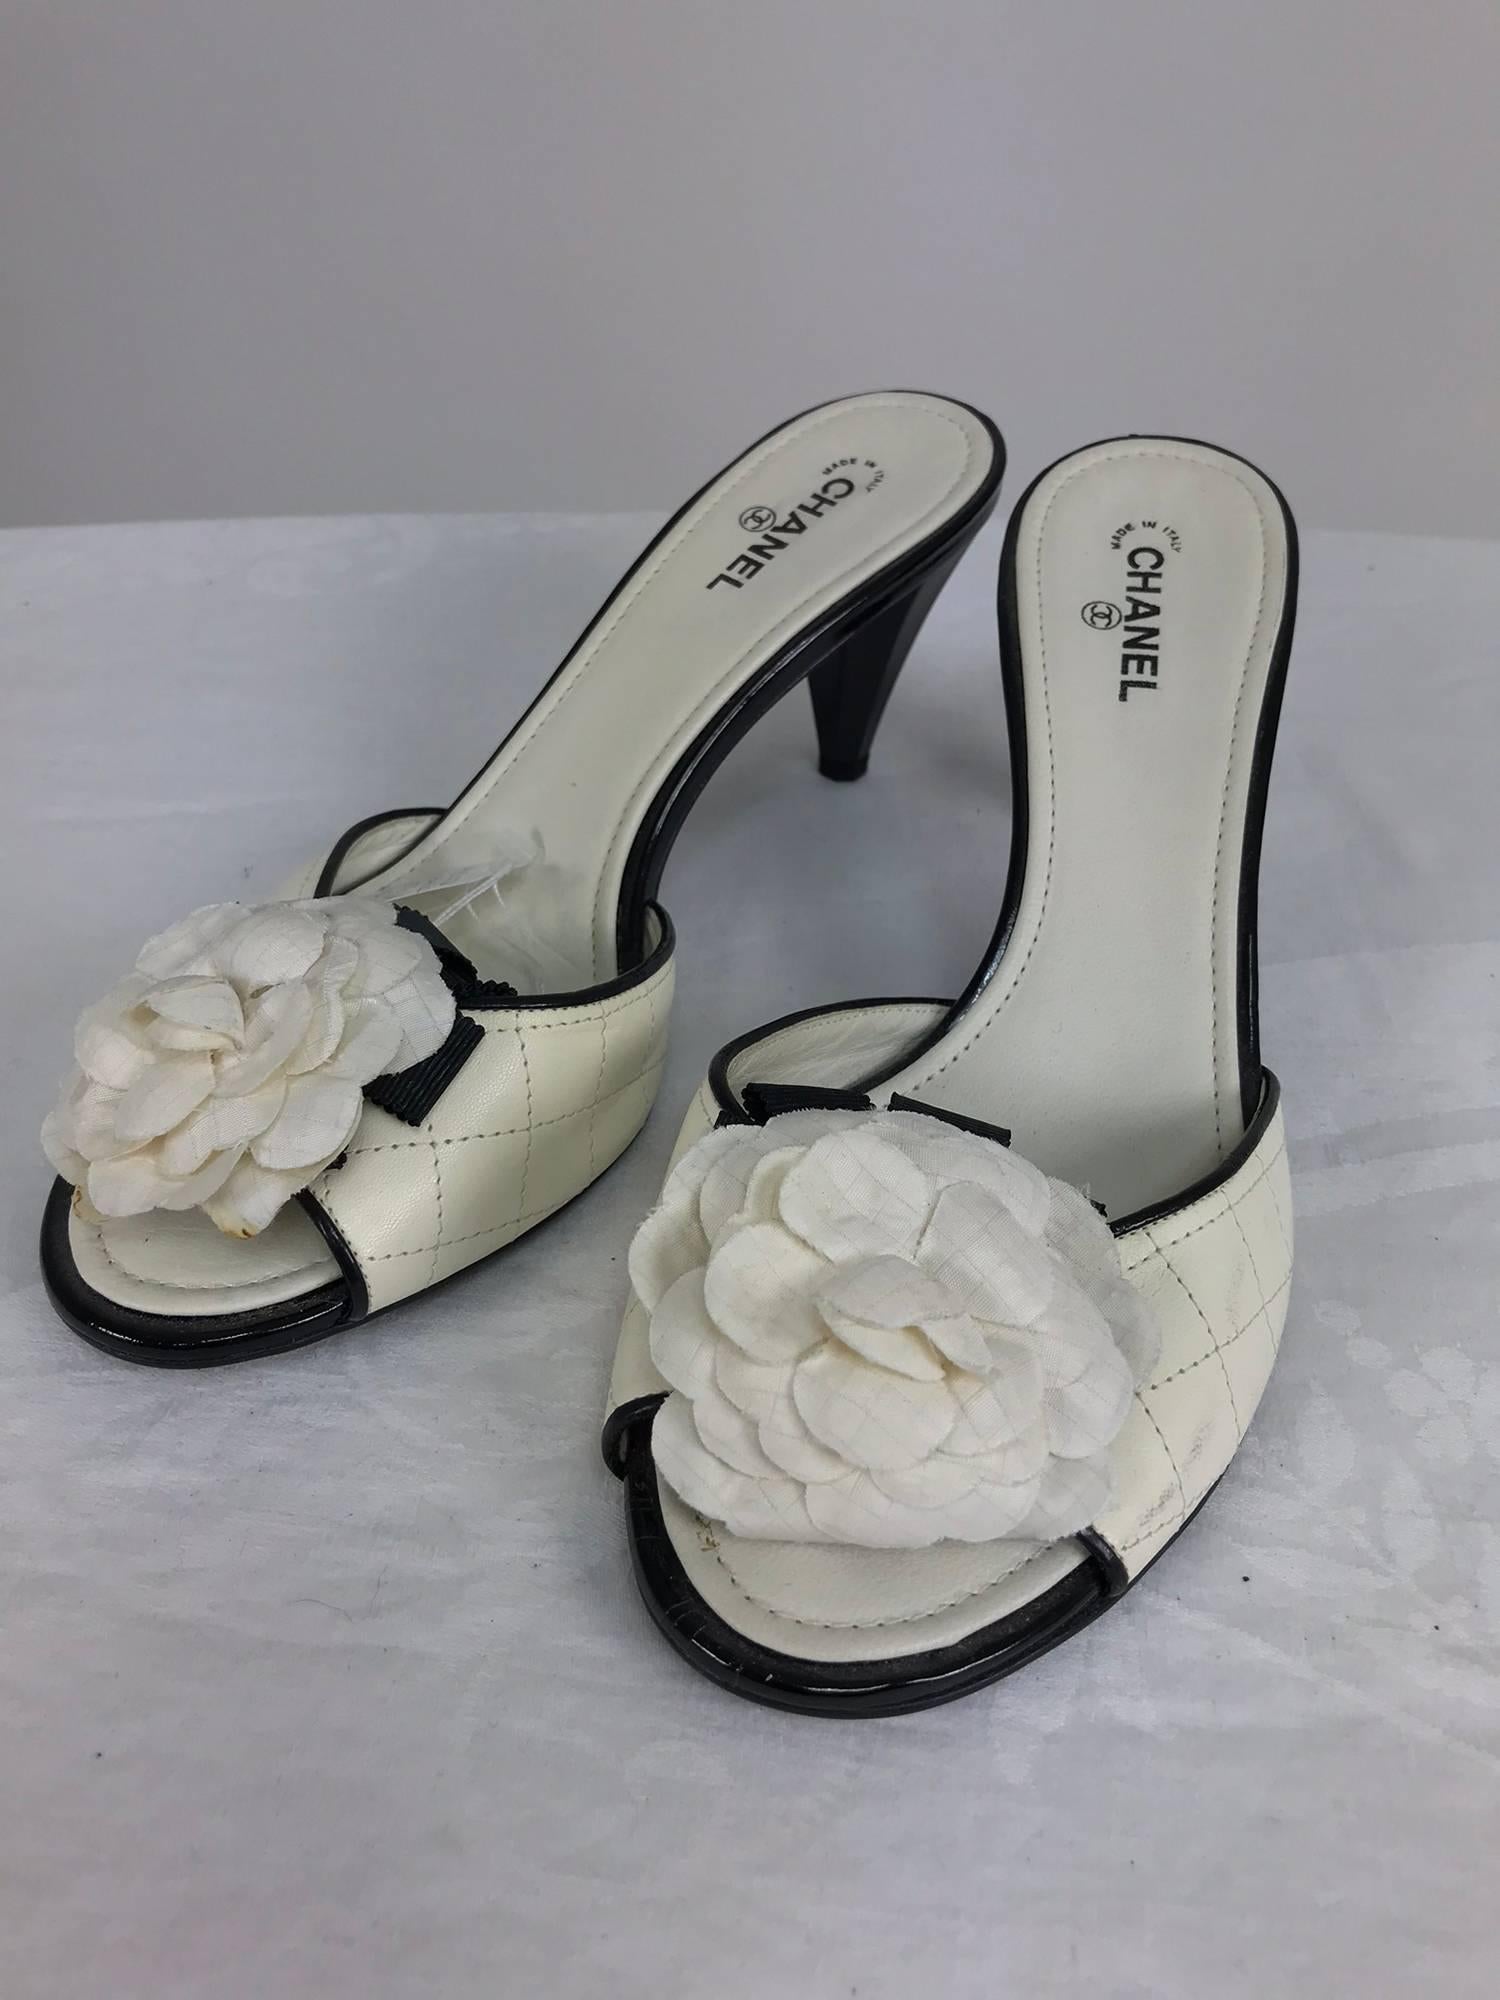 Chanel cream quilted mules with patent heels and Camellia flowers at the front 38 1/2 M...The left shoe outside near sole has some very light scuff marks, see photo, there is a bit of yellow on the right lower flower petal see photo which looks